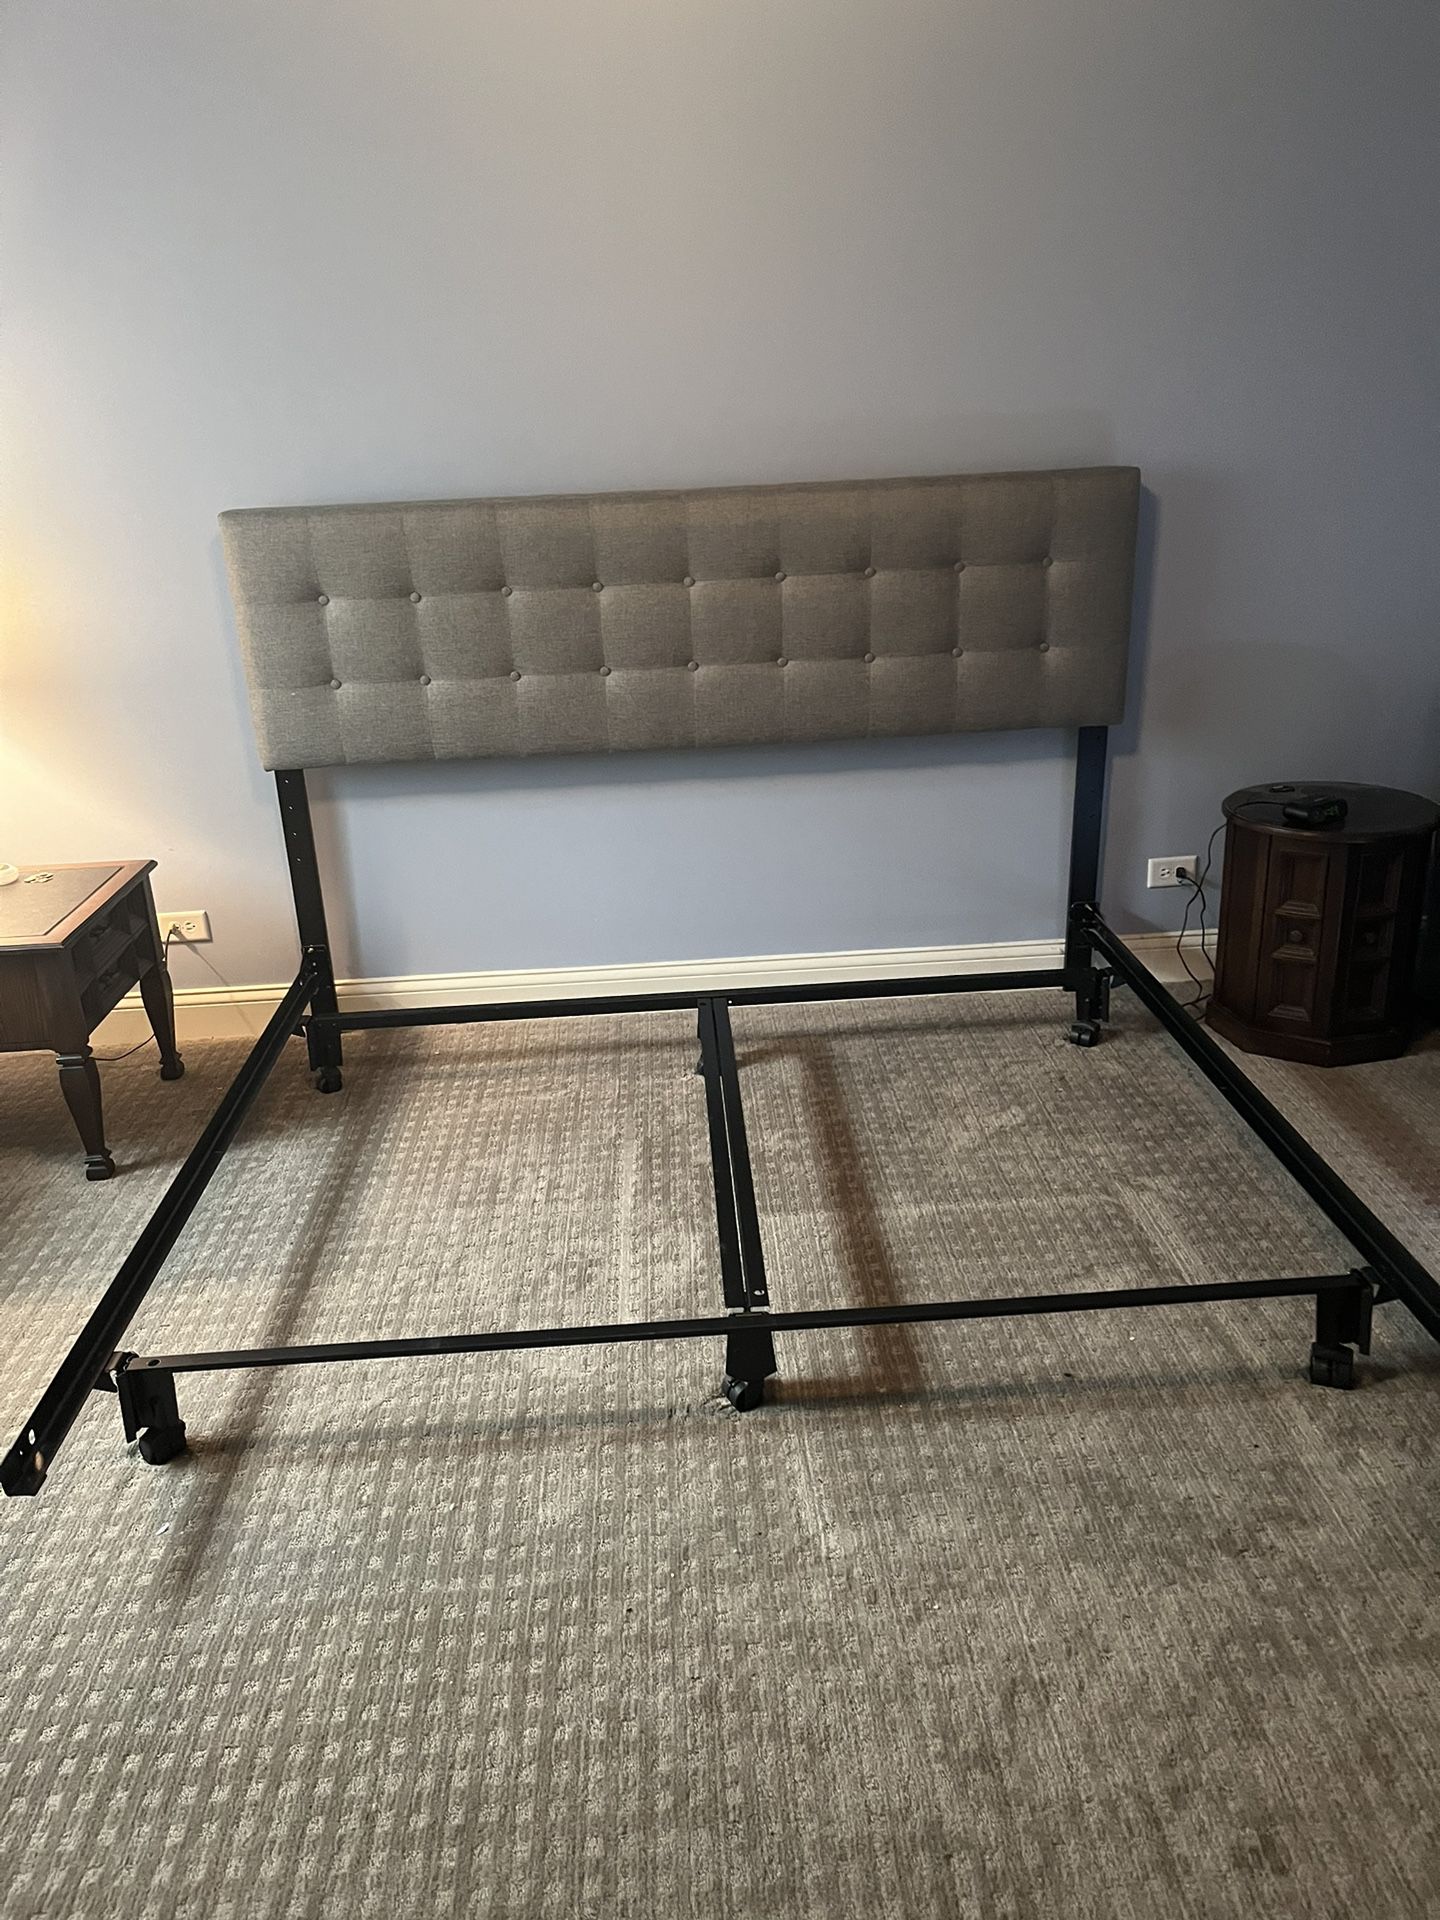 King Headboard And Bed Frame